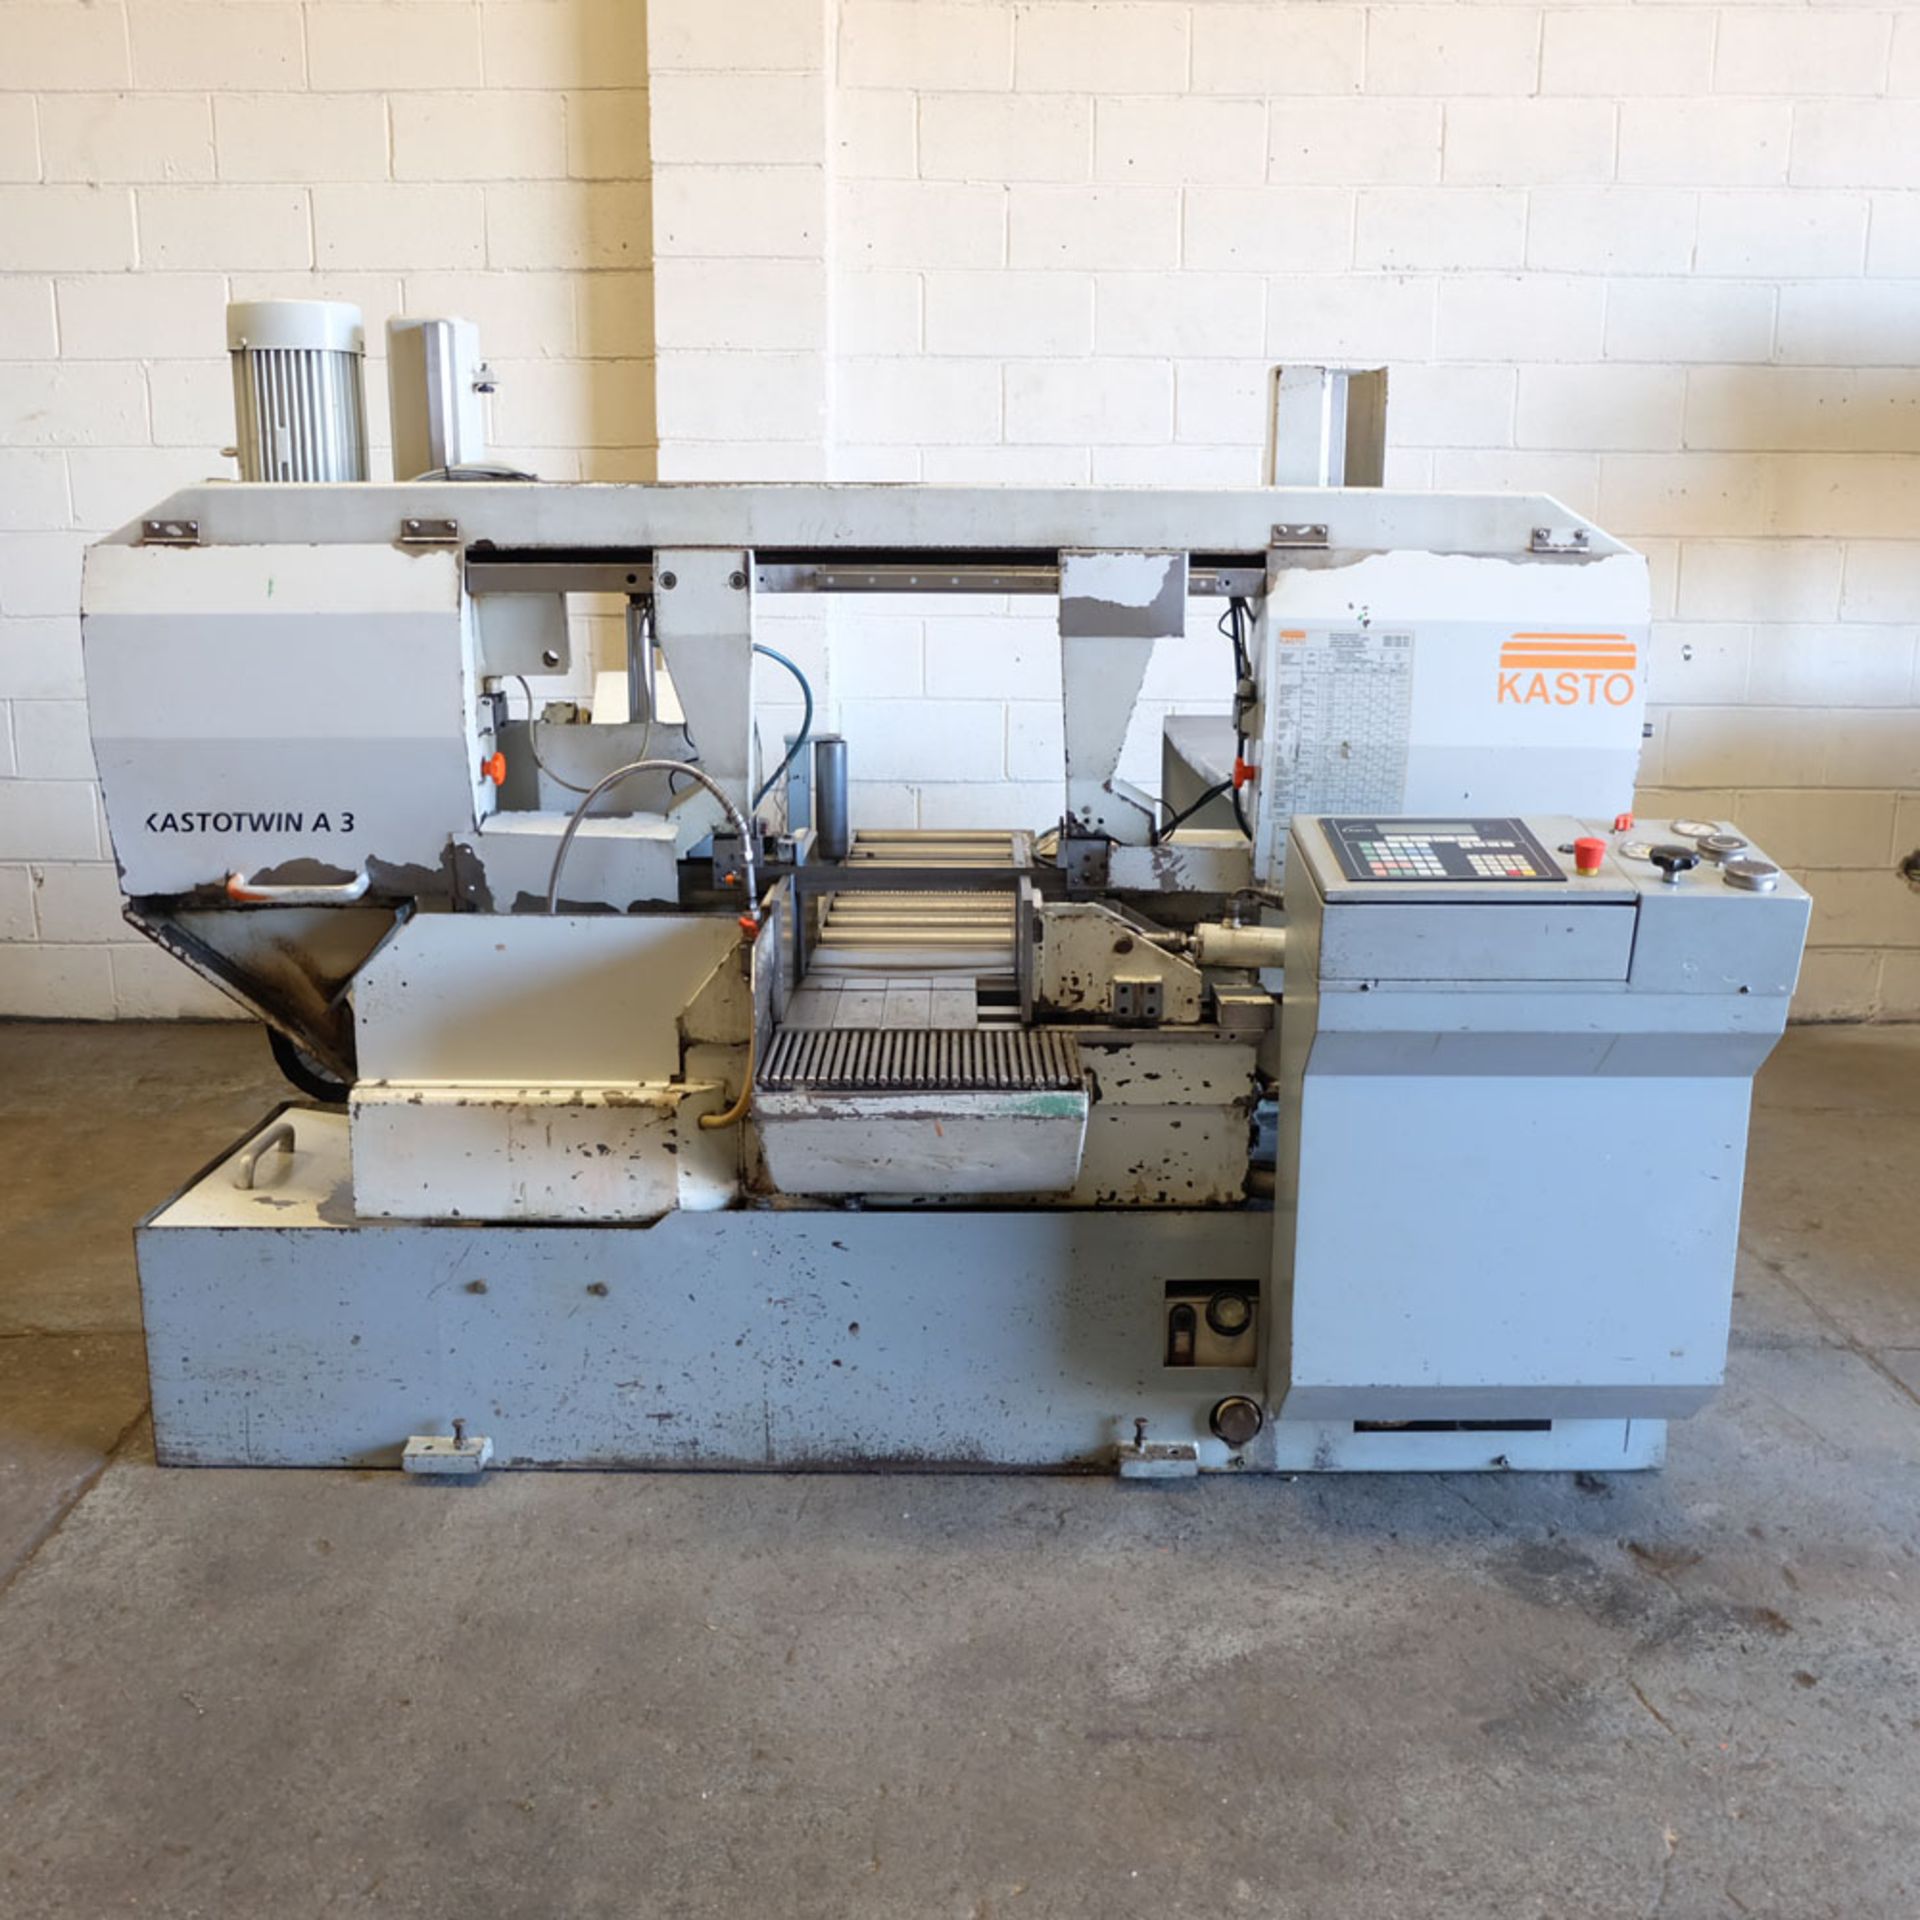 Kasto Type Kastotwin A3 Automatic Bandsaw. Capacity: 320mm Round.